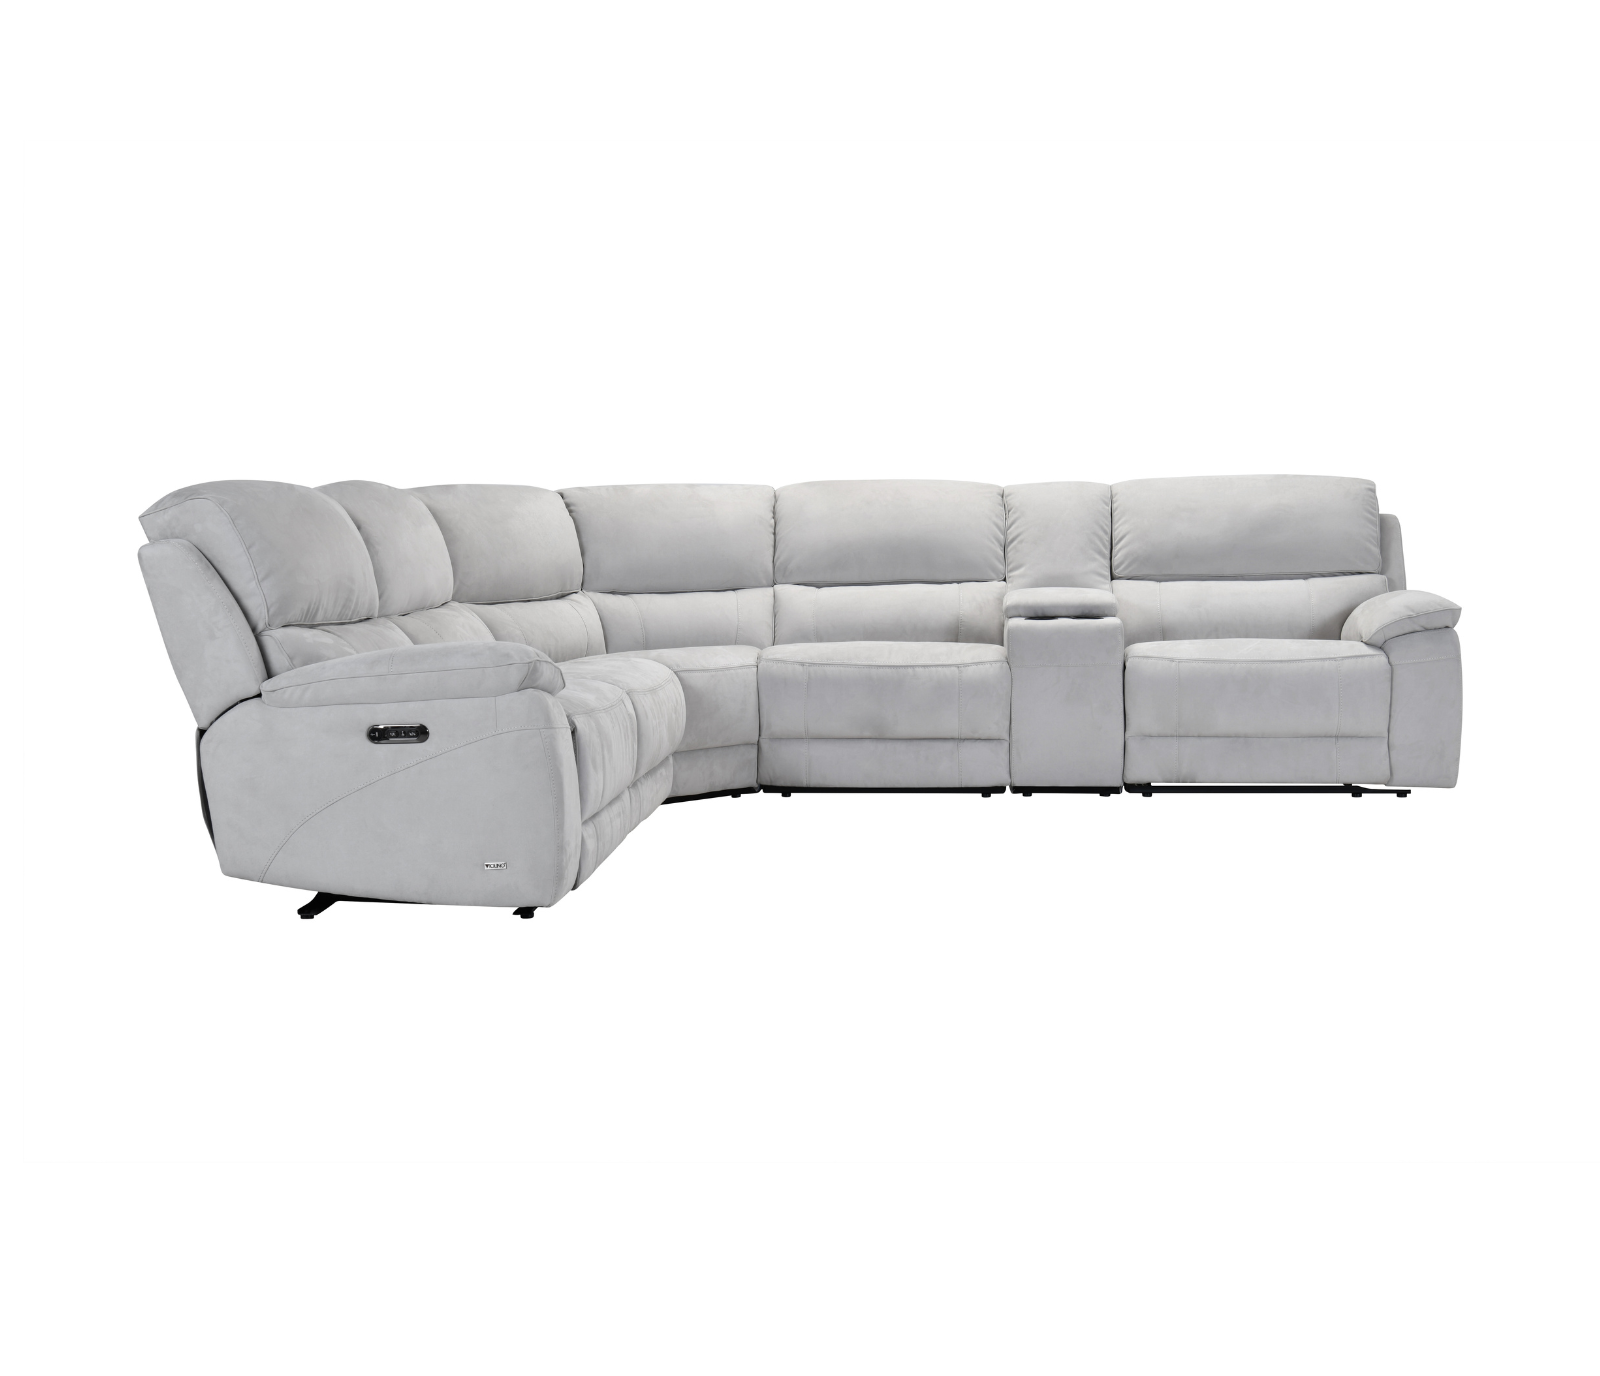 Ace 6 Power Reclining Sectional - Silver Grey Fabric